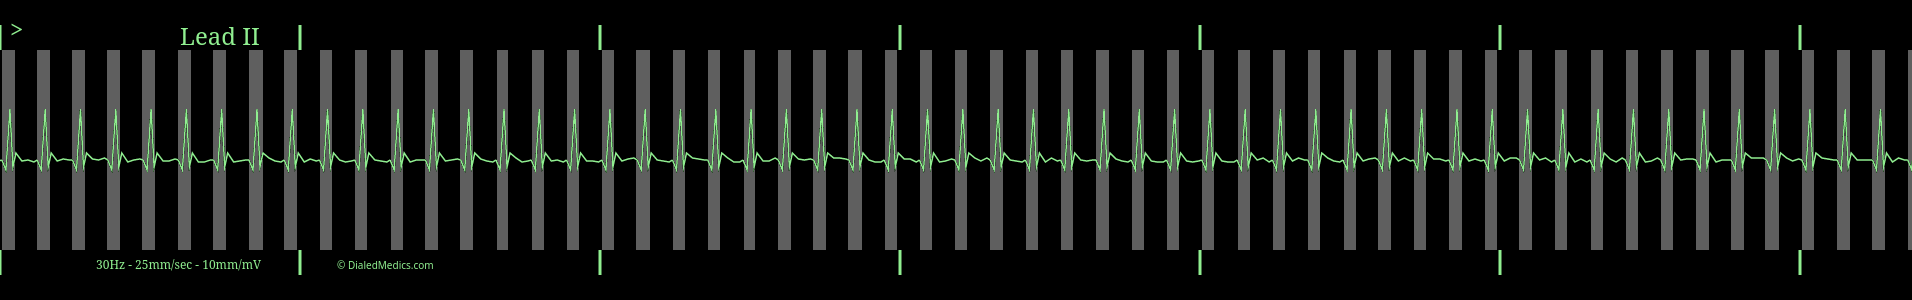 EKG Monitor capture of SVT with QRS highlighted in grey.